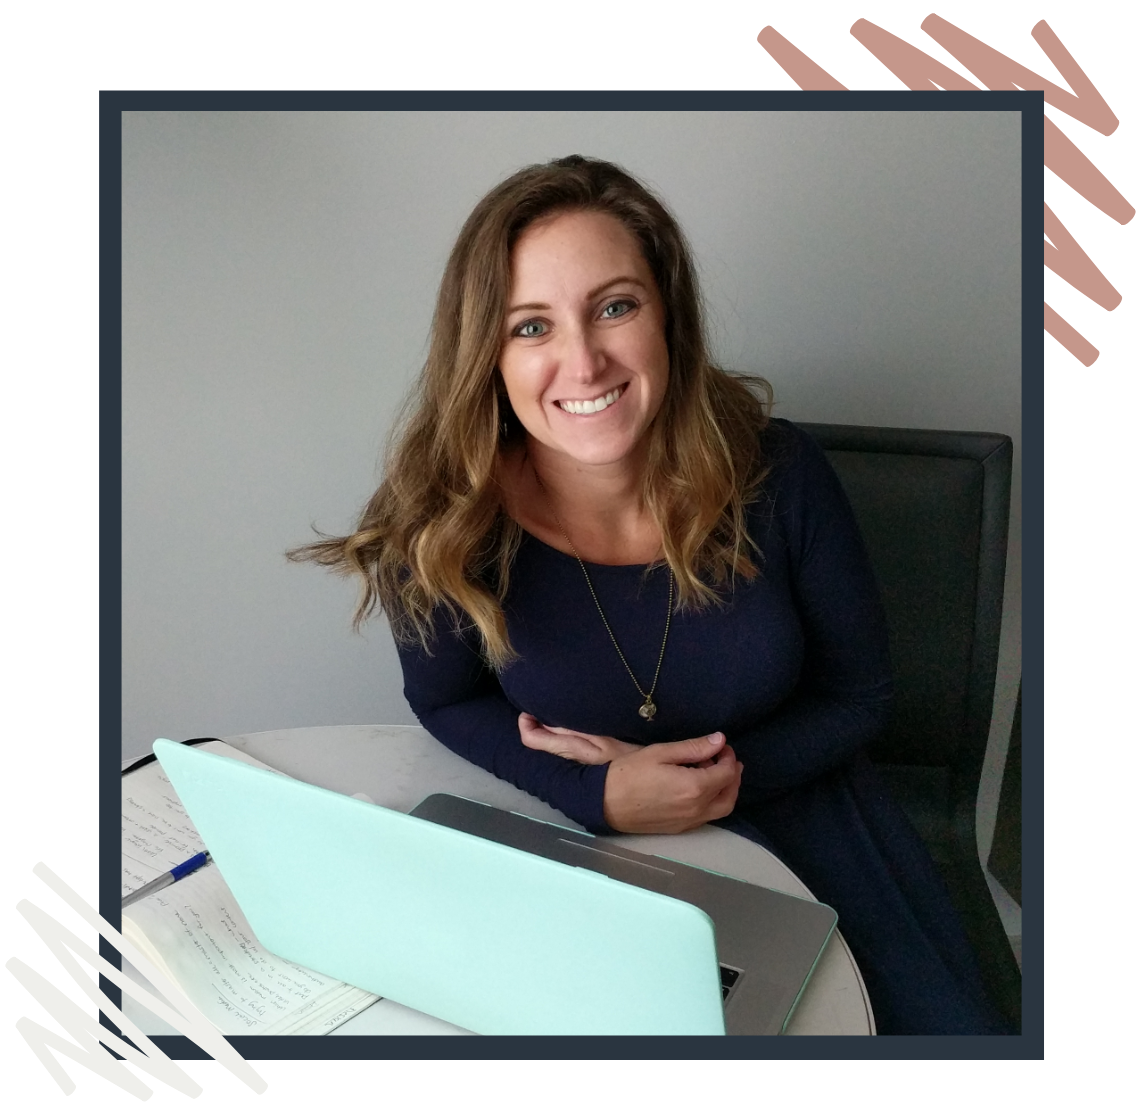  Jennifer Sanjines is the lead designer at Site Maker Studio in Knoxville, TN. They design and develop websites for small businesses in the home industry such as designers, architects and design showrooms. Site Maker Studio focuses on messaging branding and website design. 